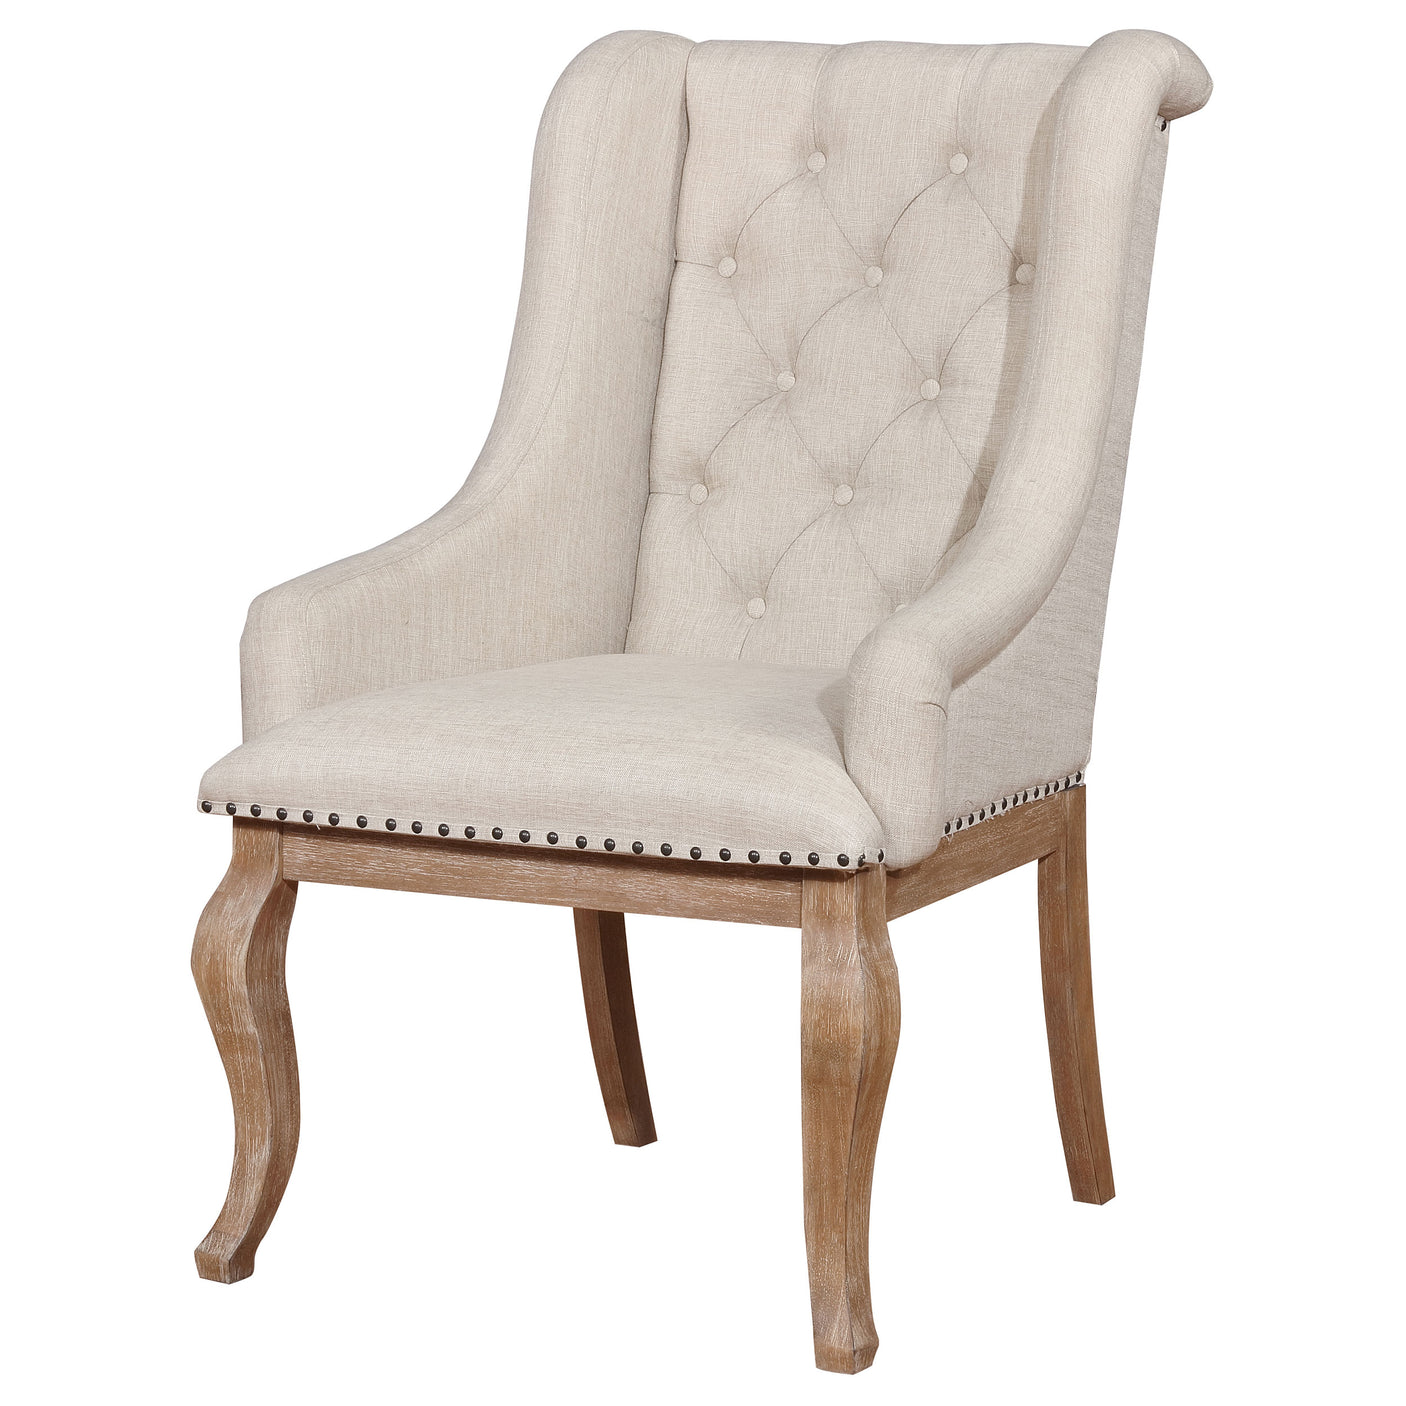 Arm Chair - Brockway Tufted Arm Chairs Cream and Barley Brown (Set of 2)